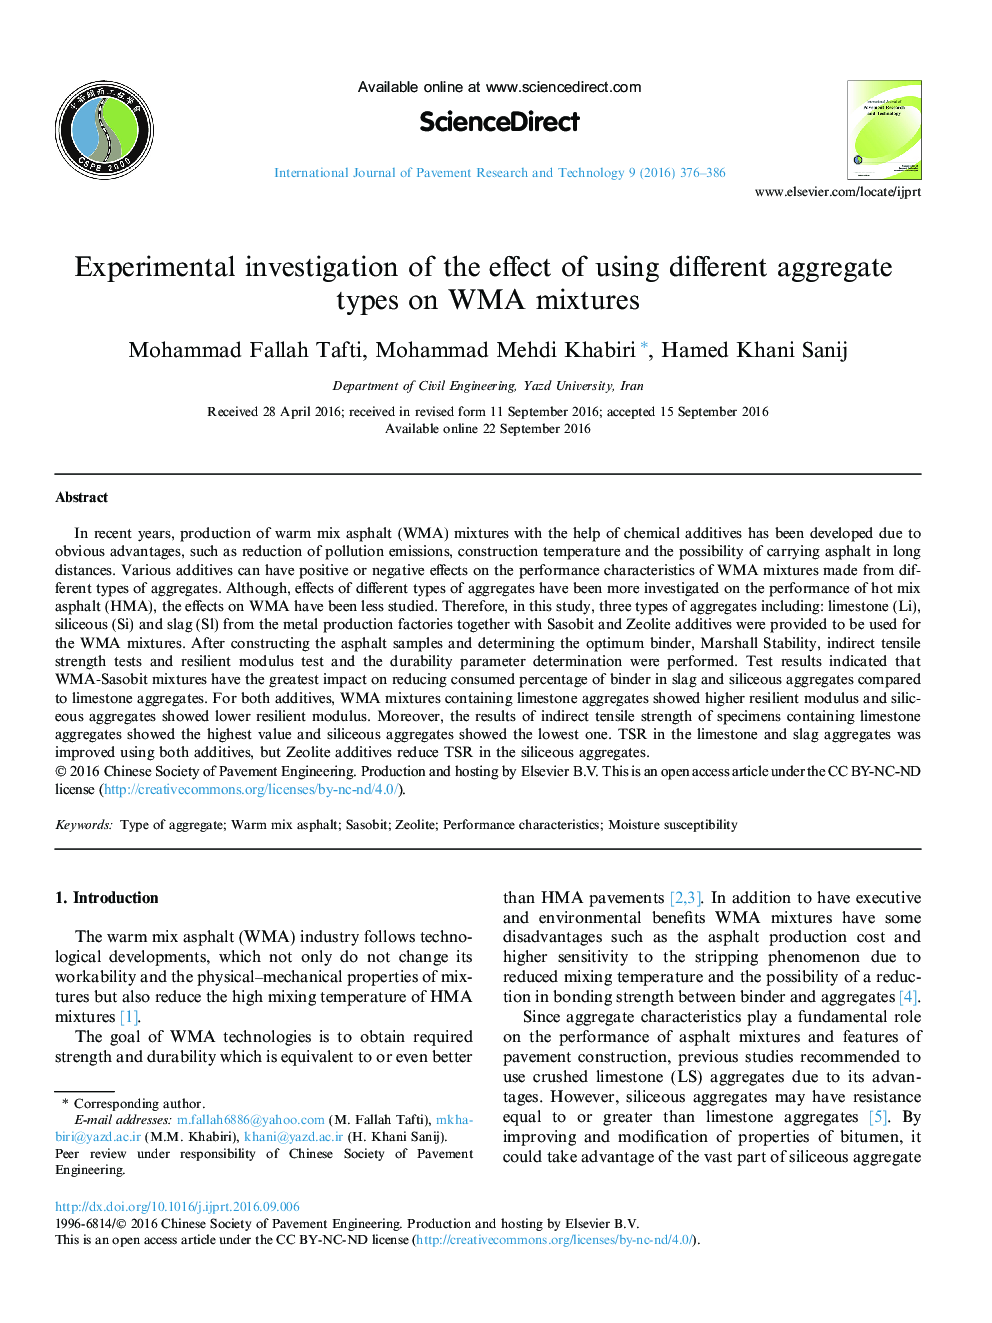 Experimental investigation of the effect of using different aggregate types on WMA mixtures